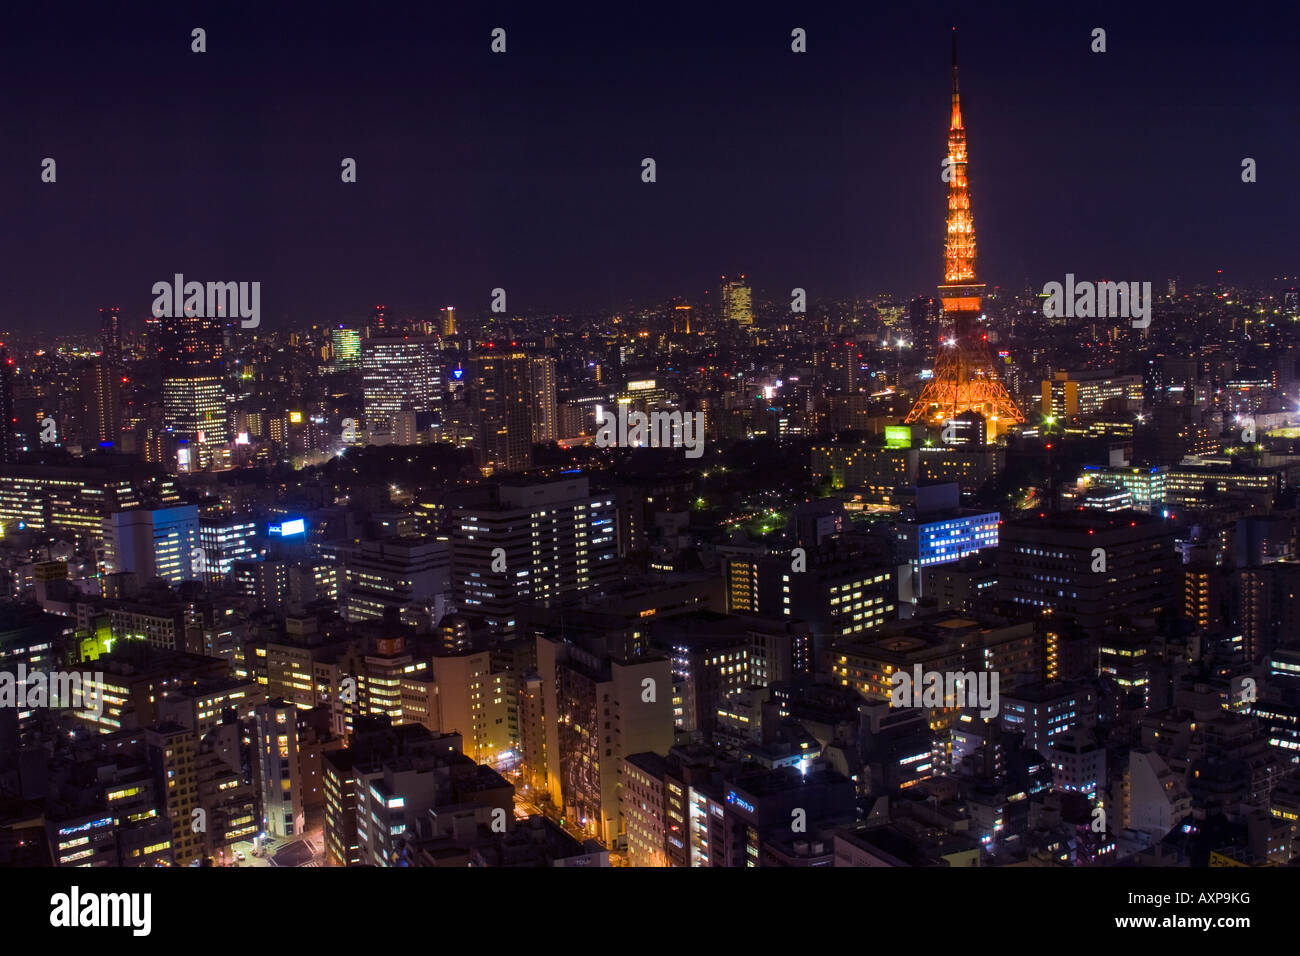 Aerial view of Tokyo Tower and the buildings of the Roppongi district of the city of Tokyo at night Stock Photo